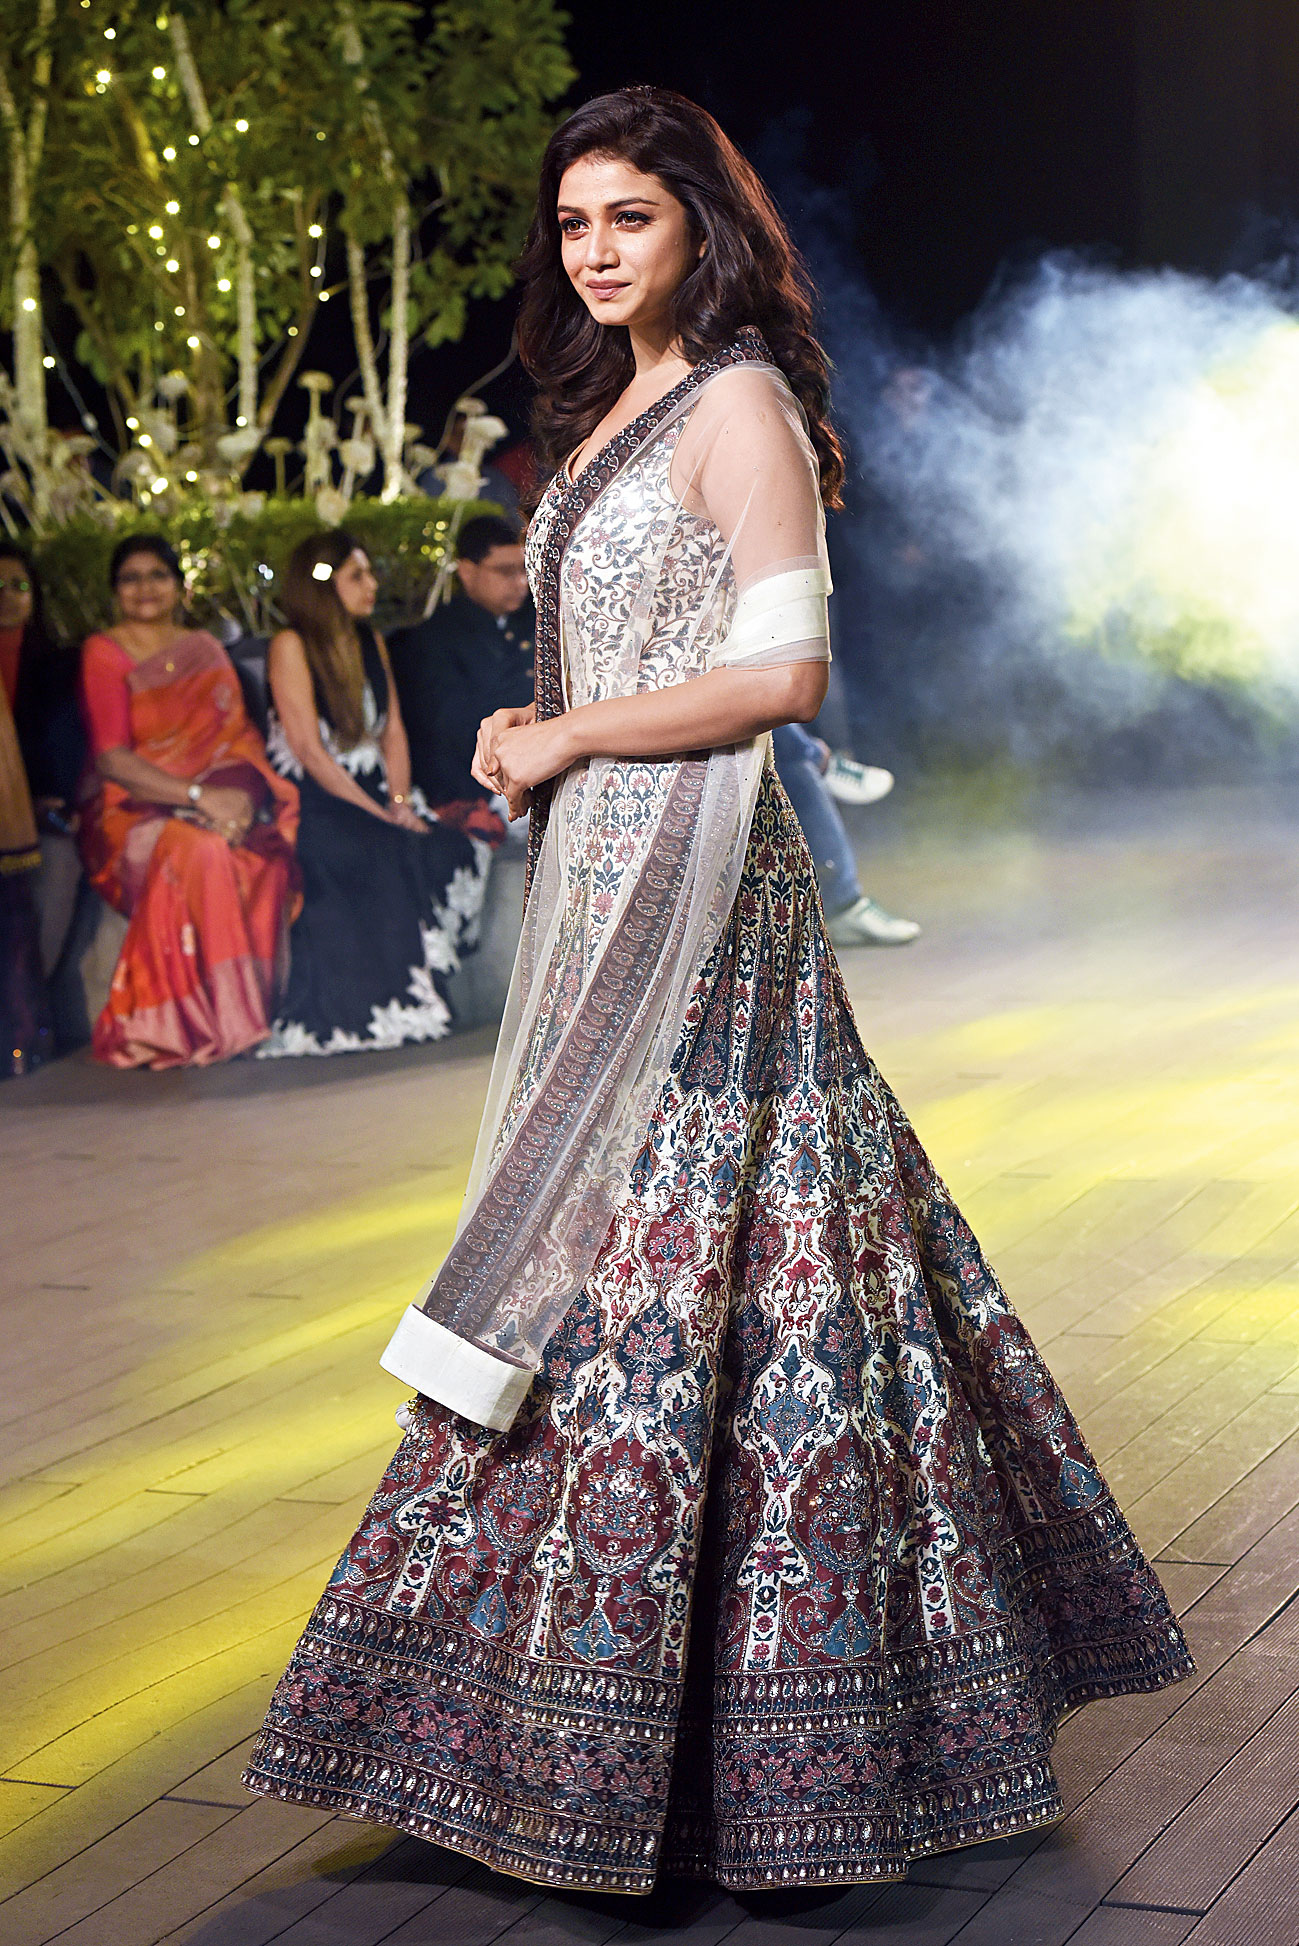 Sauraseni Maitra felt “effortless” in her lehnga. “I like effortless clothes and I really liked what I wore. The idea of the line is worth applauding. This is smart of Nusratdi,” said Sauraseni.